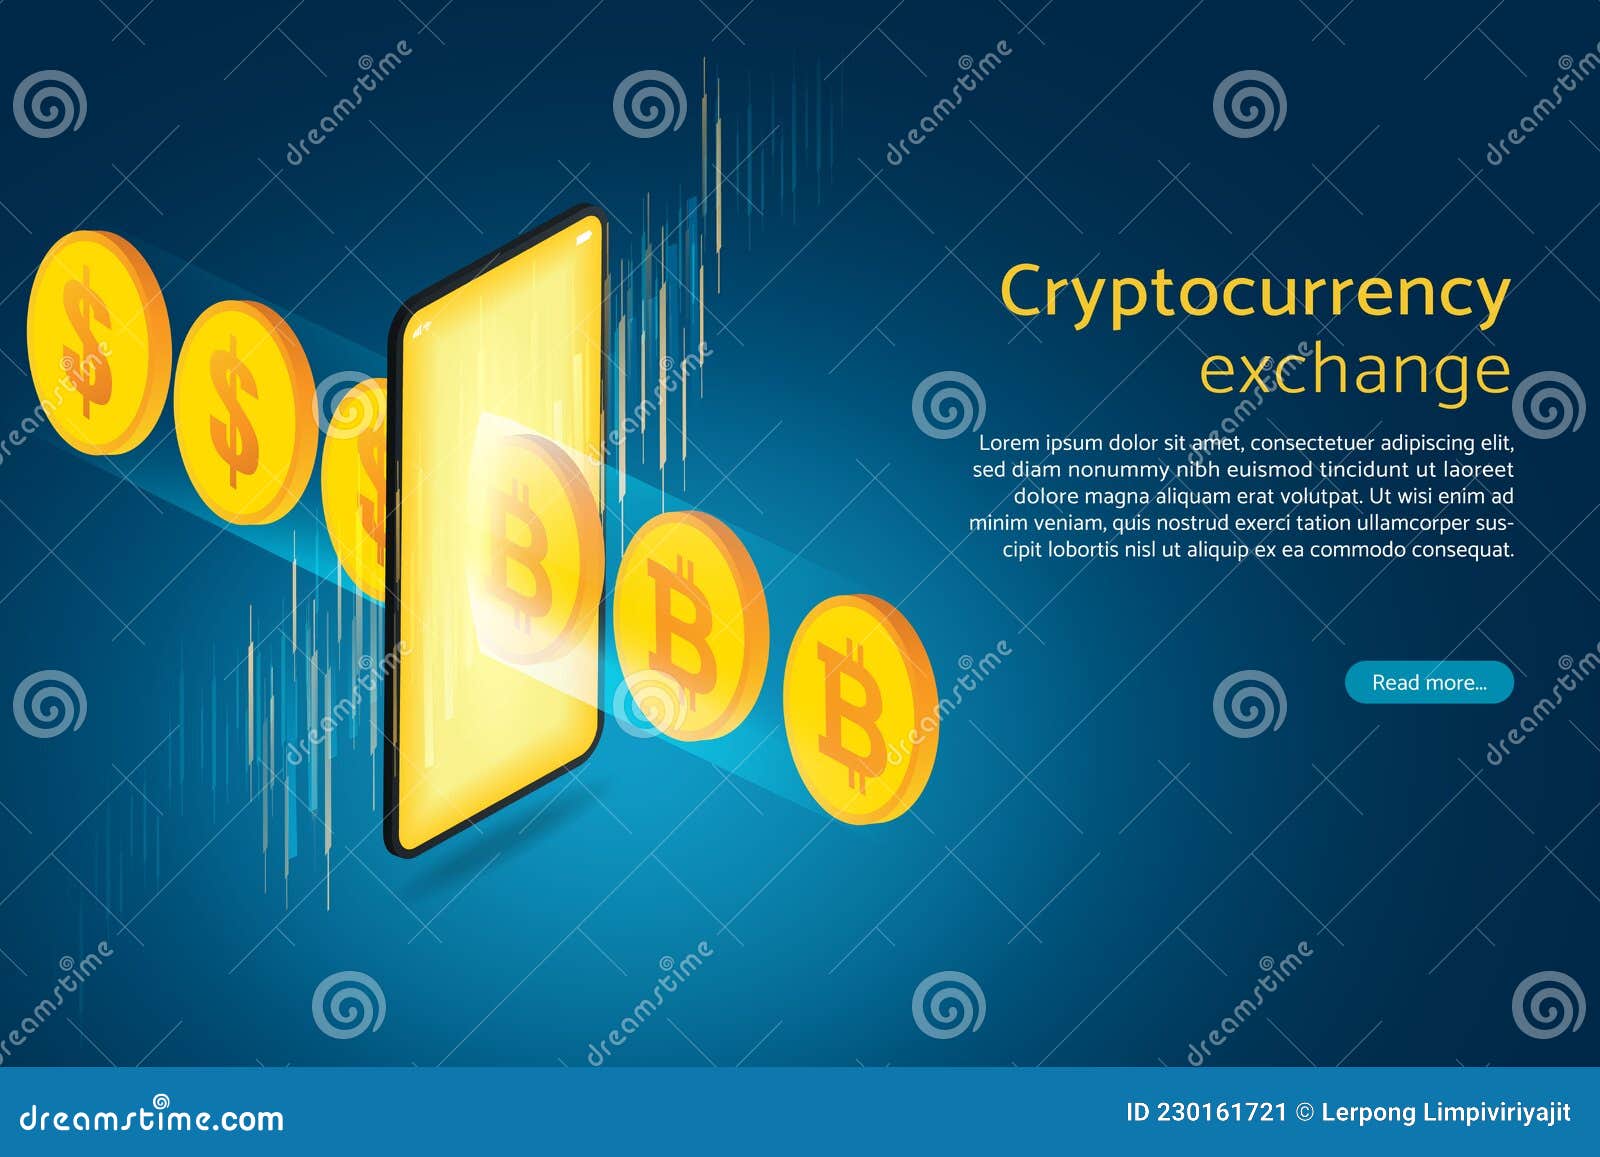 cryptocurrency buy online